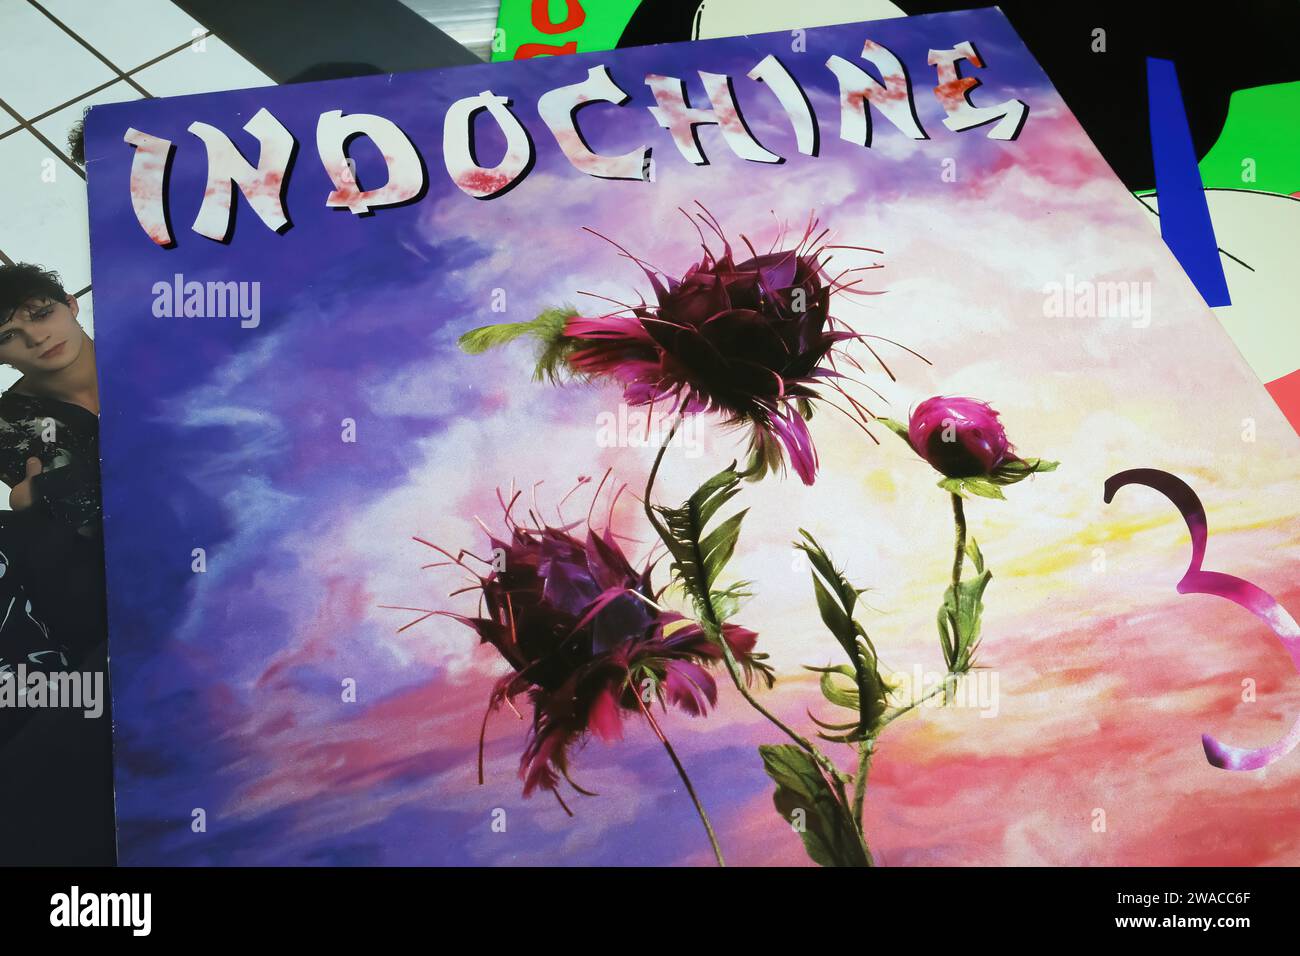 Viersen, Germany - May 9. 2023: Closeup of french new wave band Indochine vinyl record album cover 3 from 1985 Stock Photo